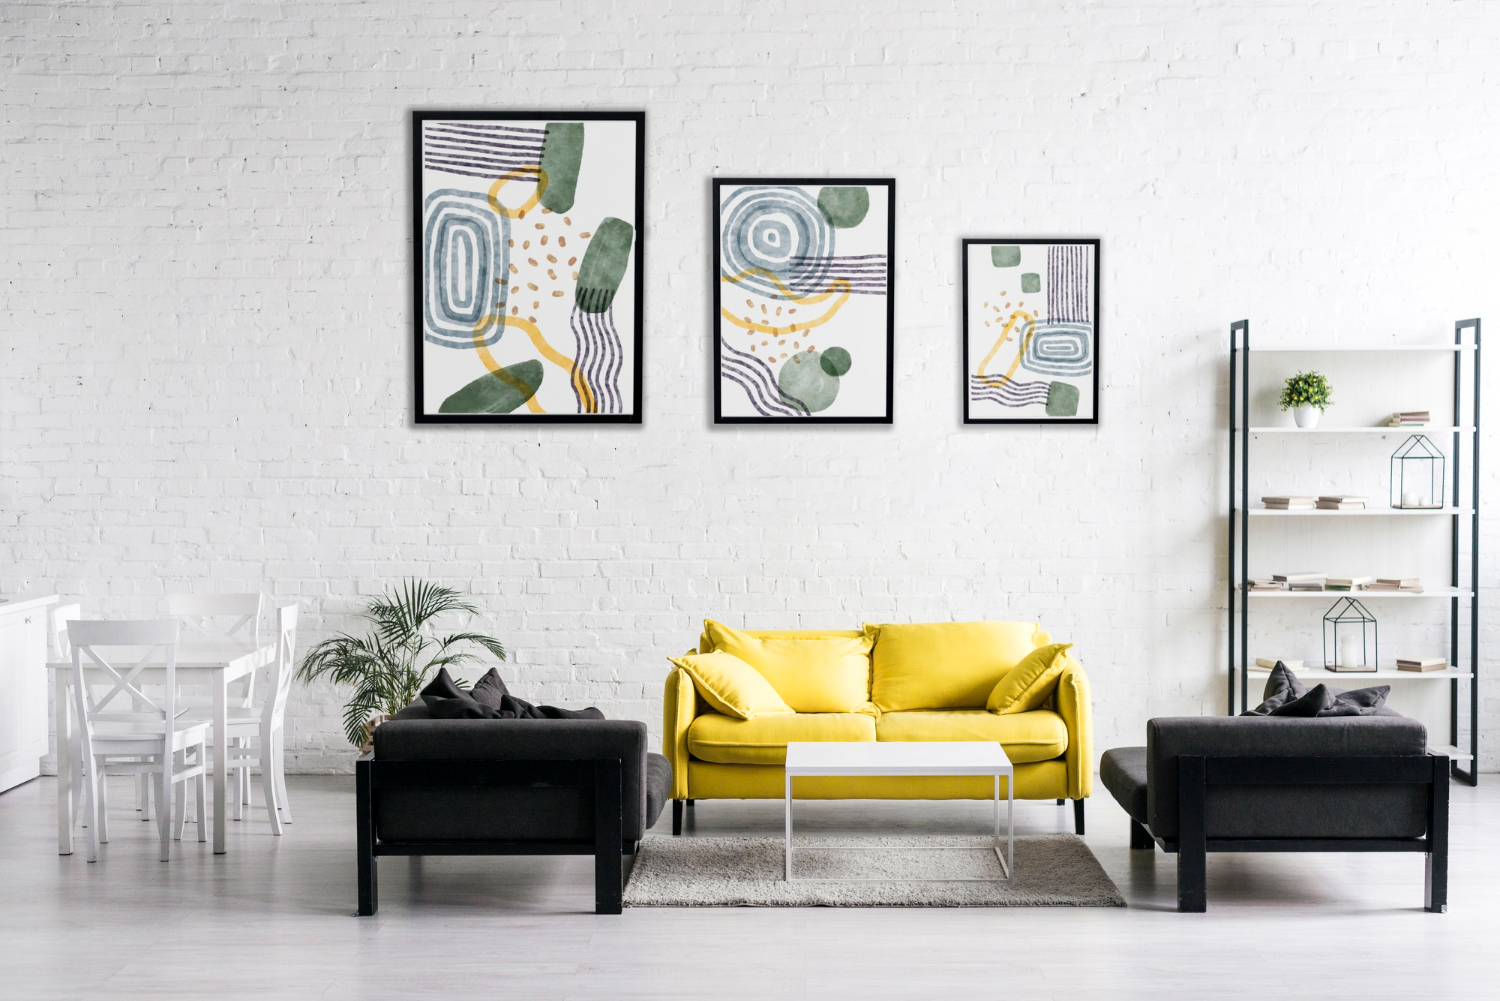 65202f0260499b6f51e18c95_interior-design-with-photoframes-yellow-couch